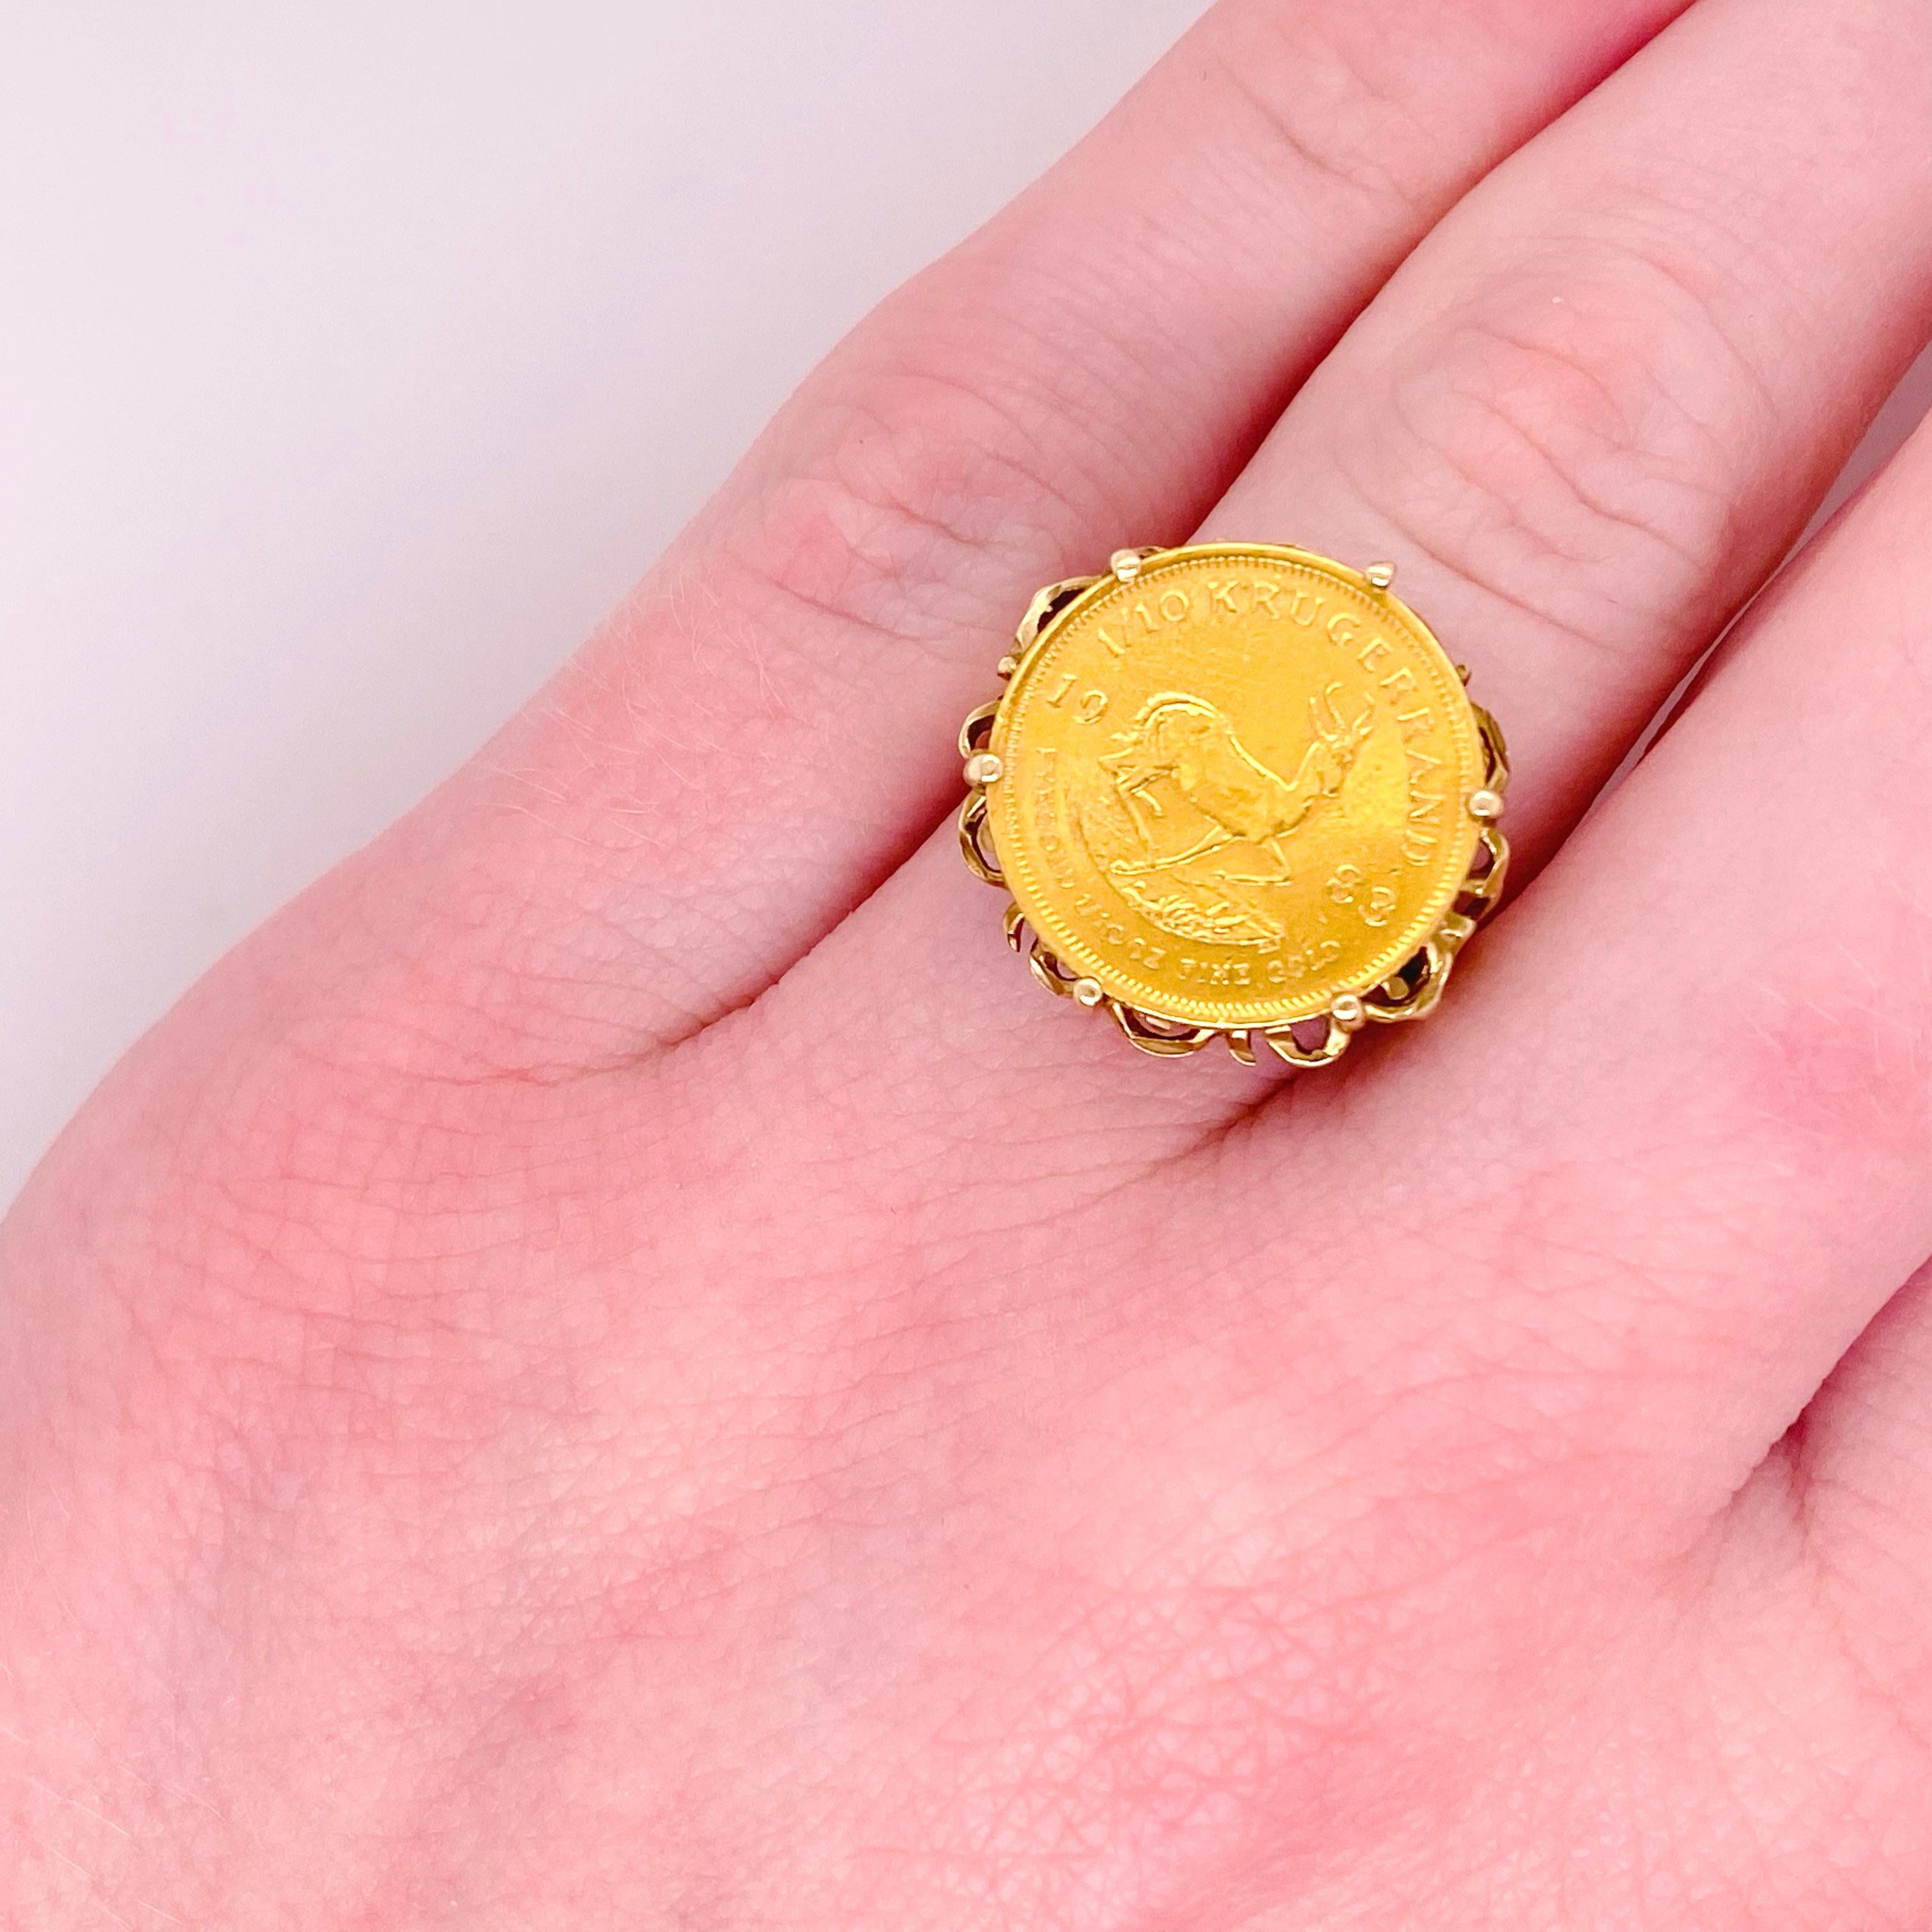 1983 Gold 1/20th oz Krugerrand (Genuine 22 karat yellow gold coin from South Africa) with ladies filigree ring setting. It is beautiful from every direction!
Metal Quality: 14 Yellow Gold
Top Of Ring Measurements: 18.1 mm x 19.5 mm
Band Width: 2